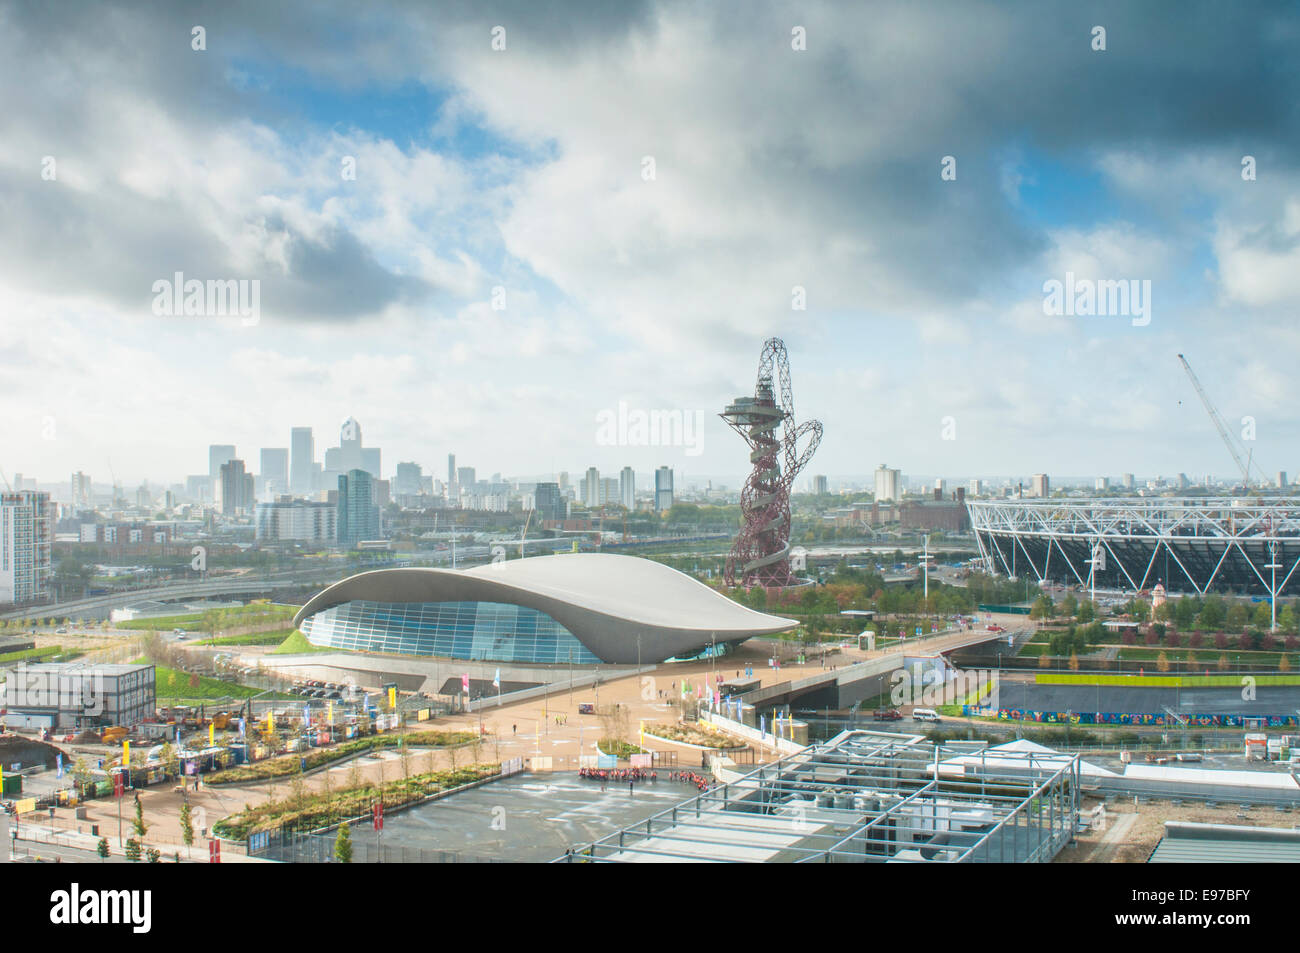 Early morning views over the Queen Elizabeth II Olympic Park, Stratford, London E20. PHILLIP ROBERTS Stock Photo